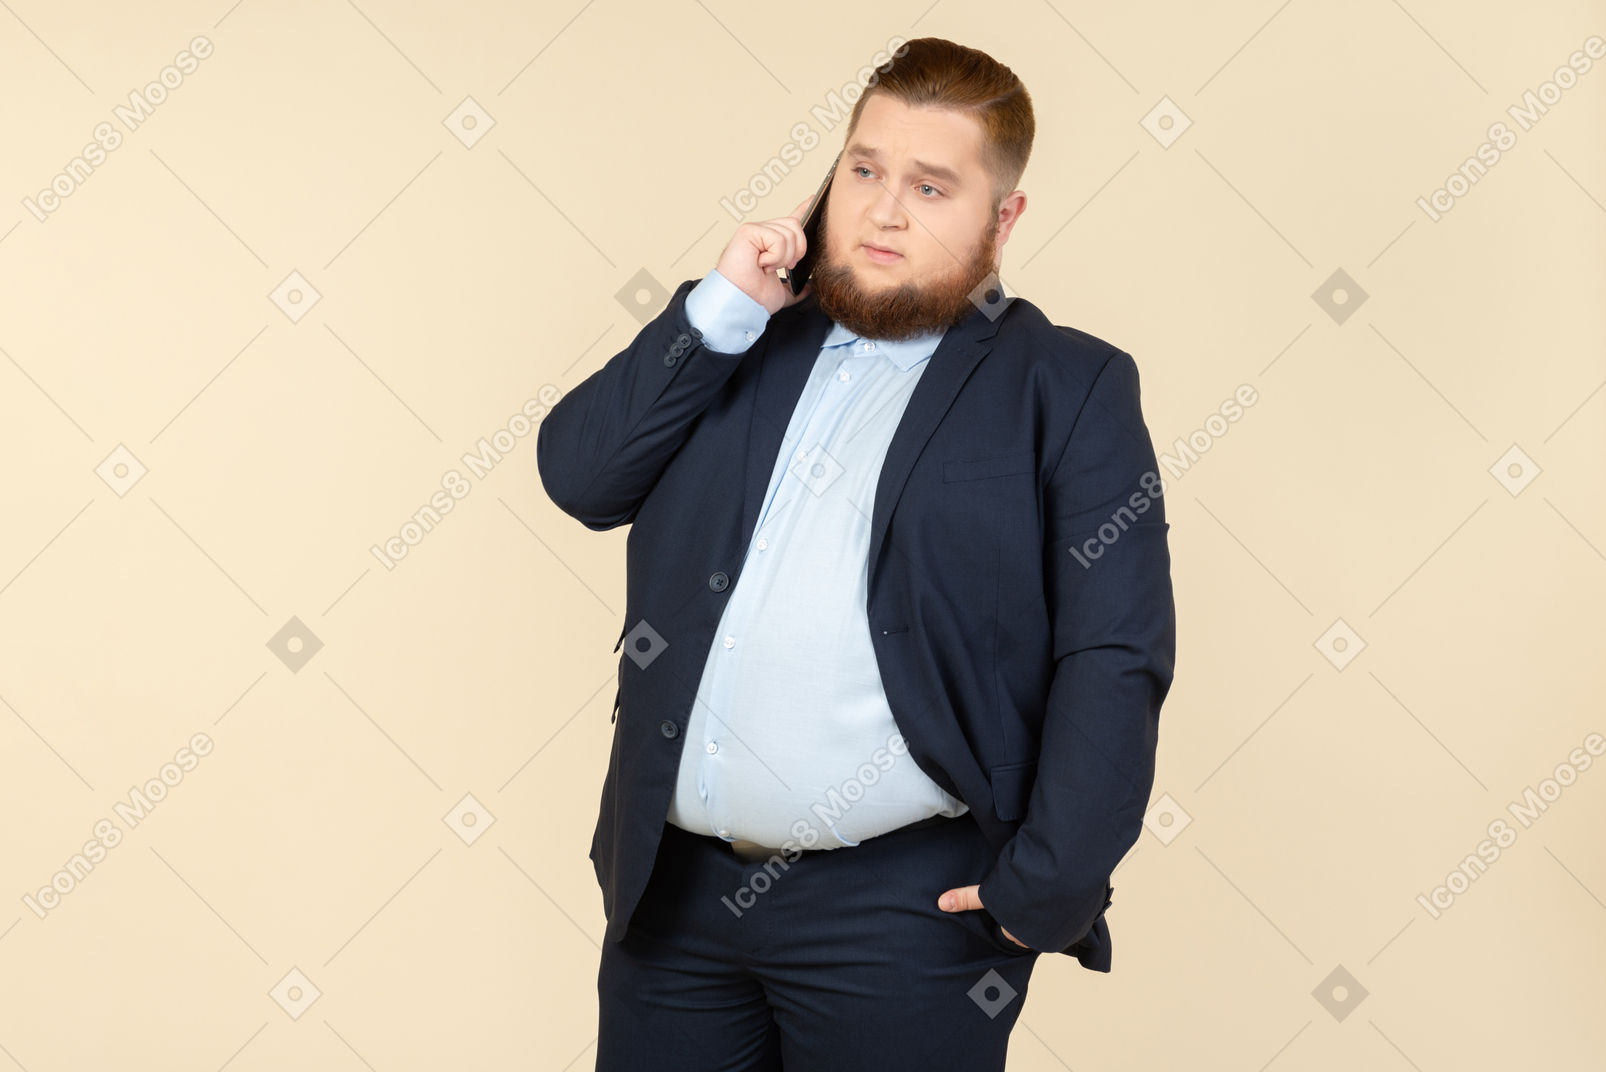 Serious looking young overweight office worker talking on the phone